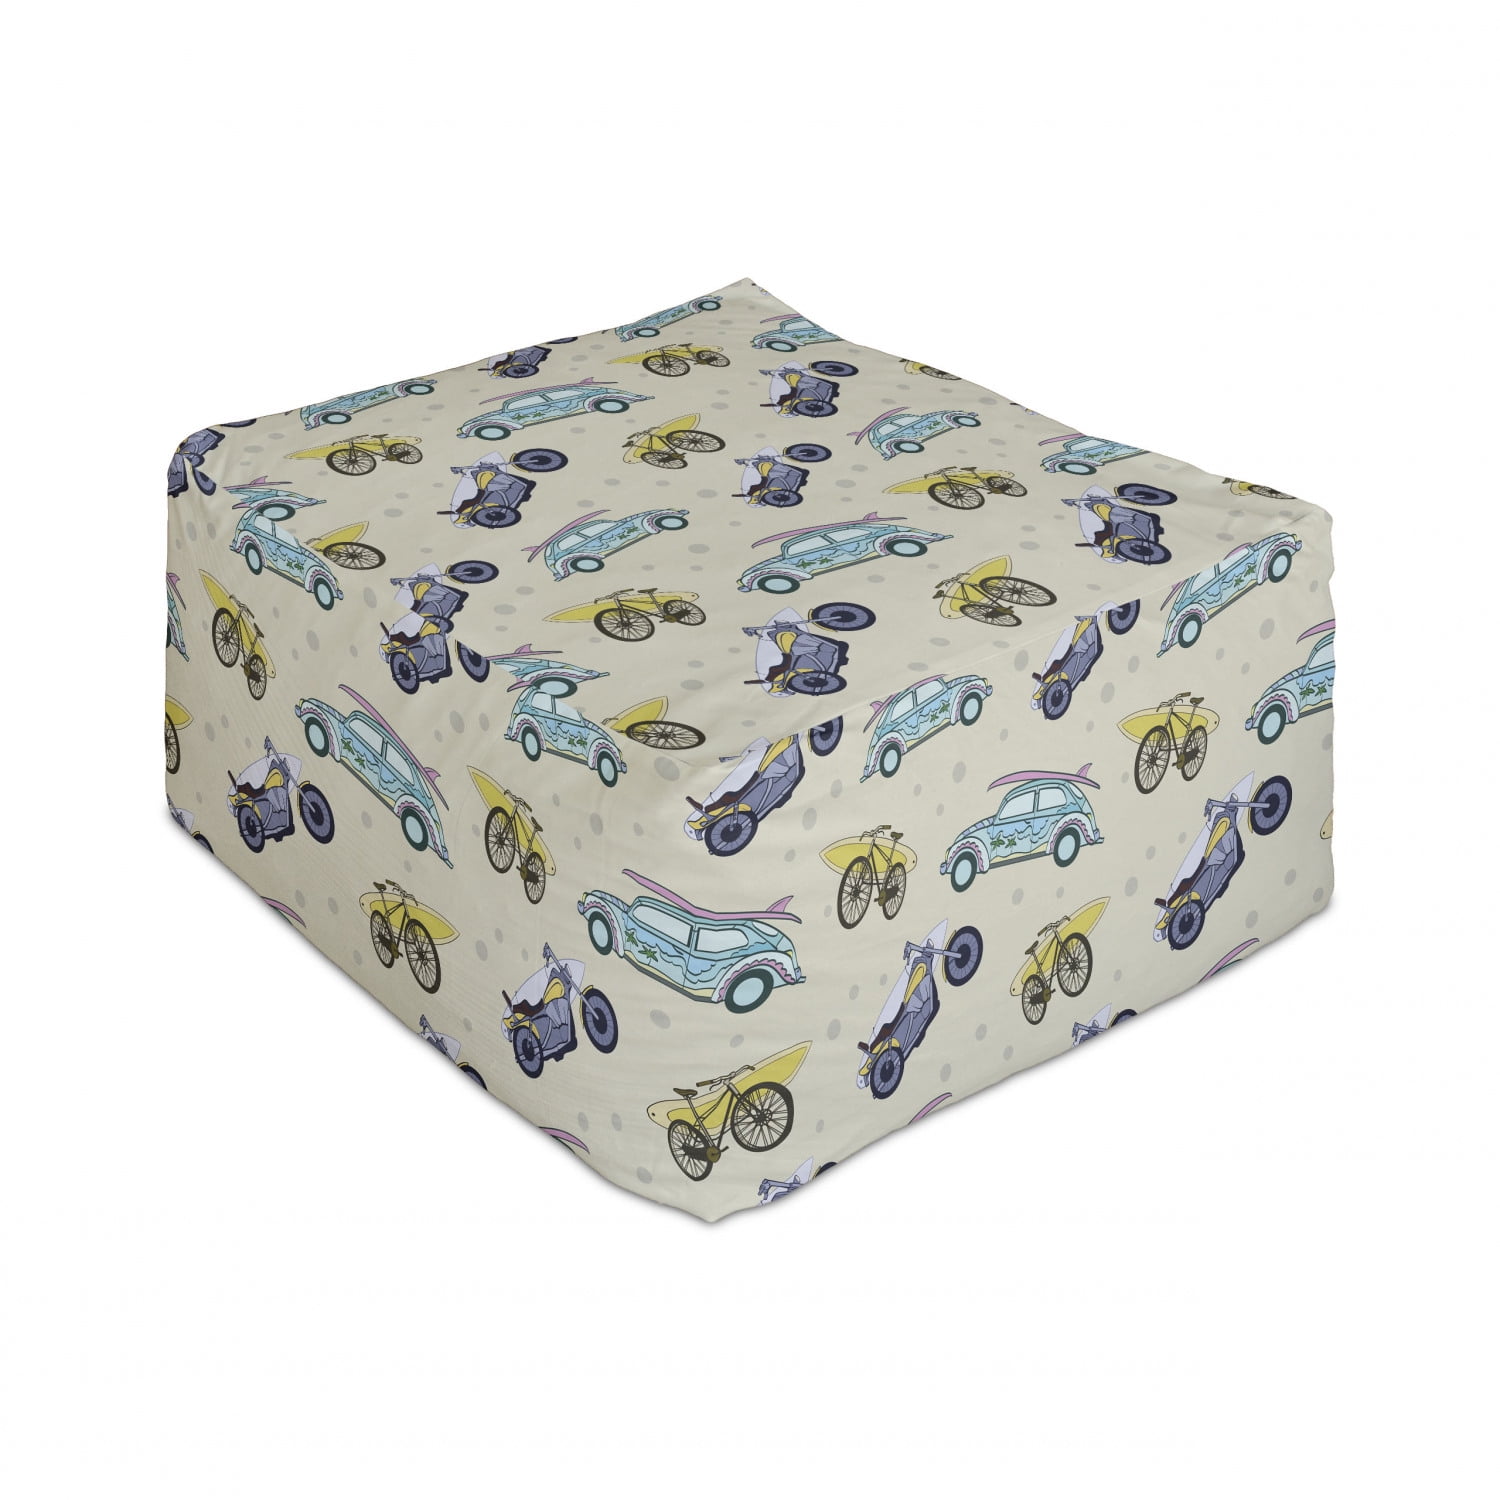 Ambesonne Boat Rectangle Pouf Under Desk Foot Stool for Living Room Office Ottoman with Cover 25 Multicolor Rhythmic Motifs of Sailboats Nautical Theme on a Plain Backdrop Marine Lifestyle 